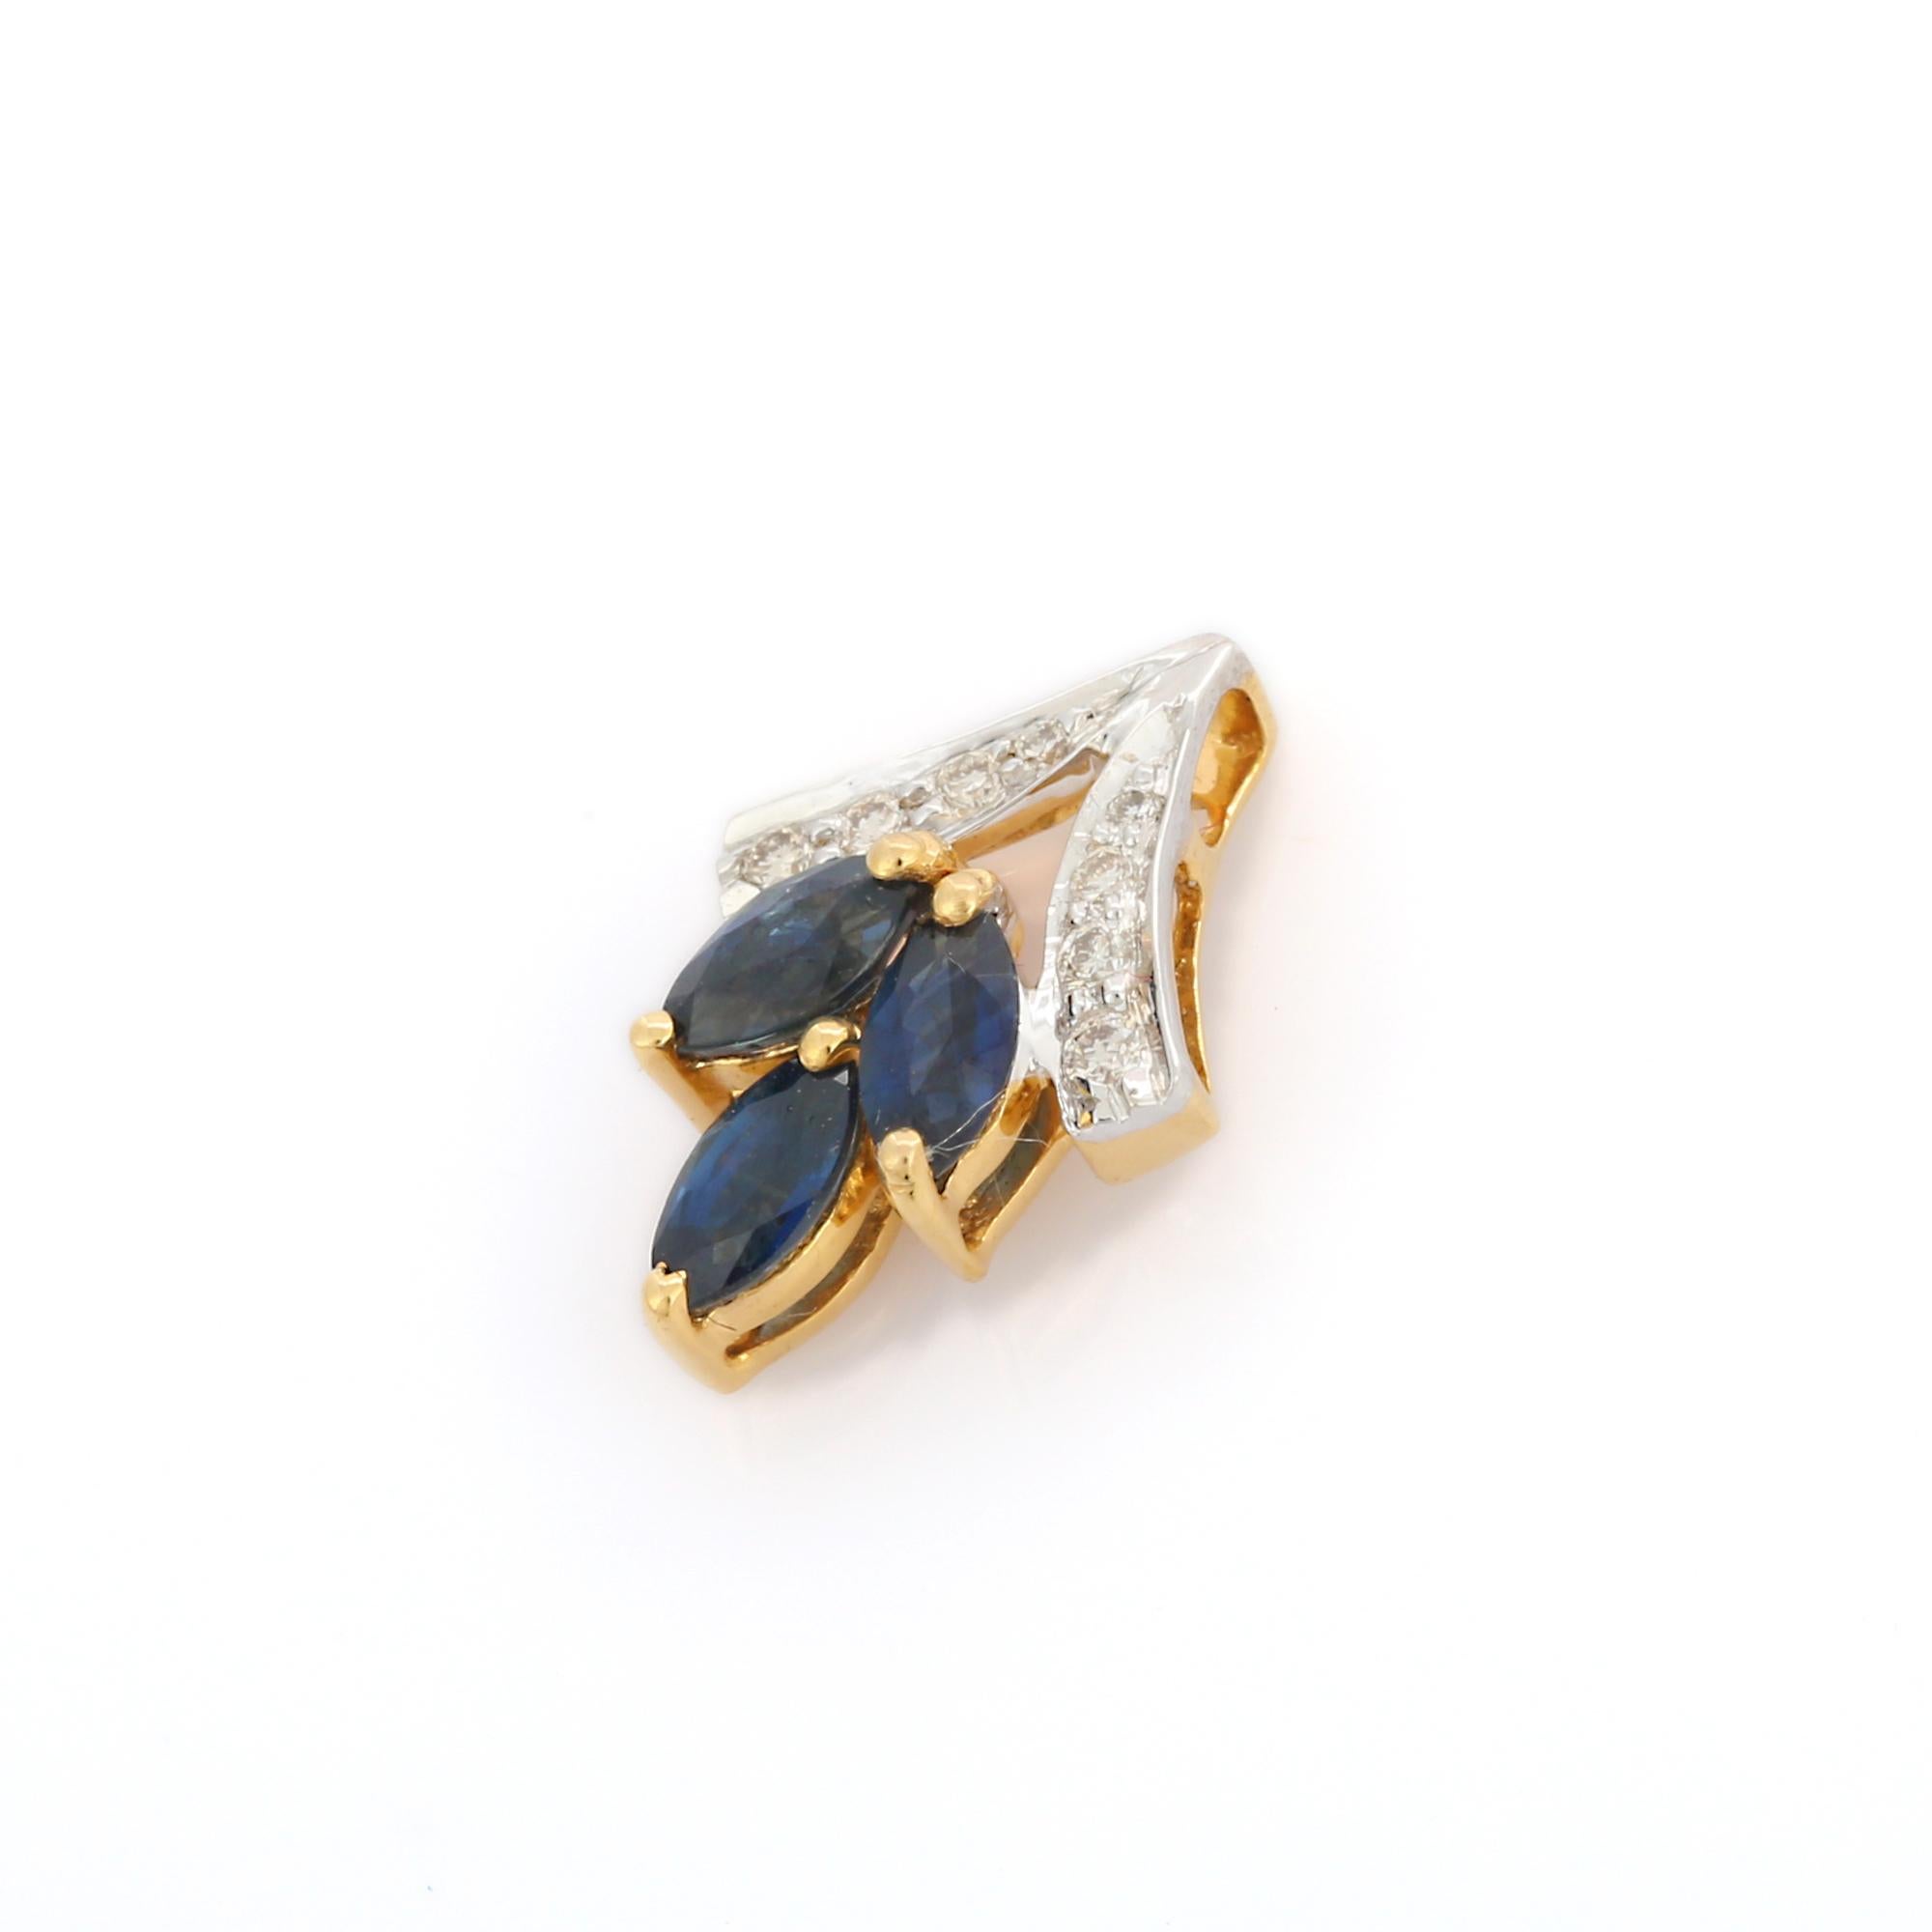 Natural Blue Sapphire pendant in 18K Gold. It has three marquise cut sapphire studded with diamonds that completes your look with a decent touch. Pendants are used to wear or gifted to represent love and promises. It's an attractive jewelry piece